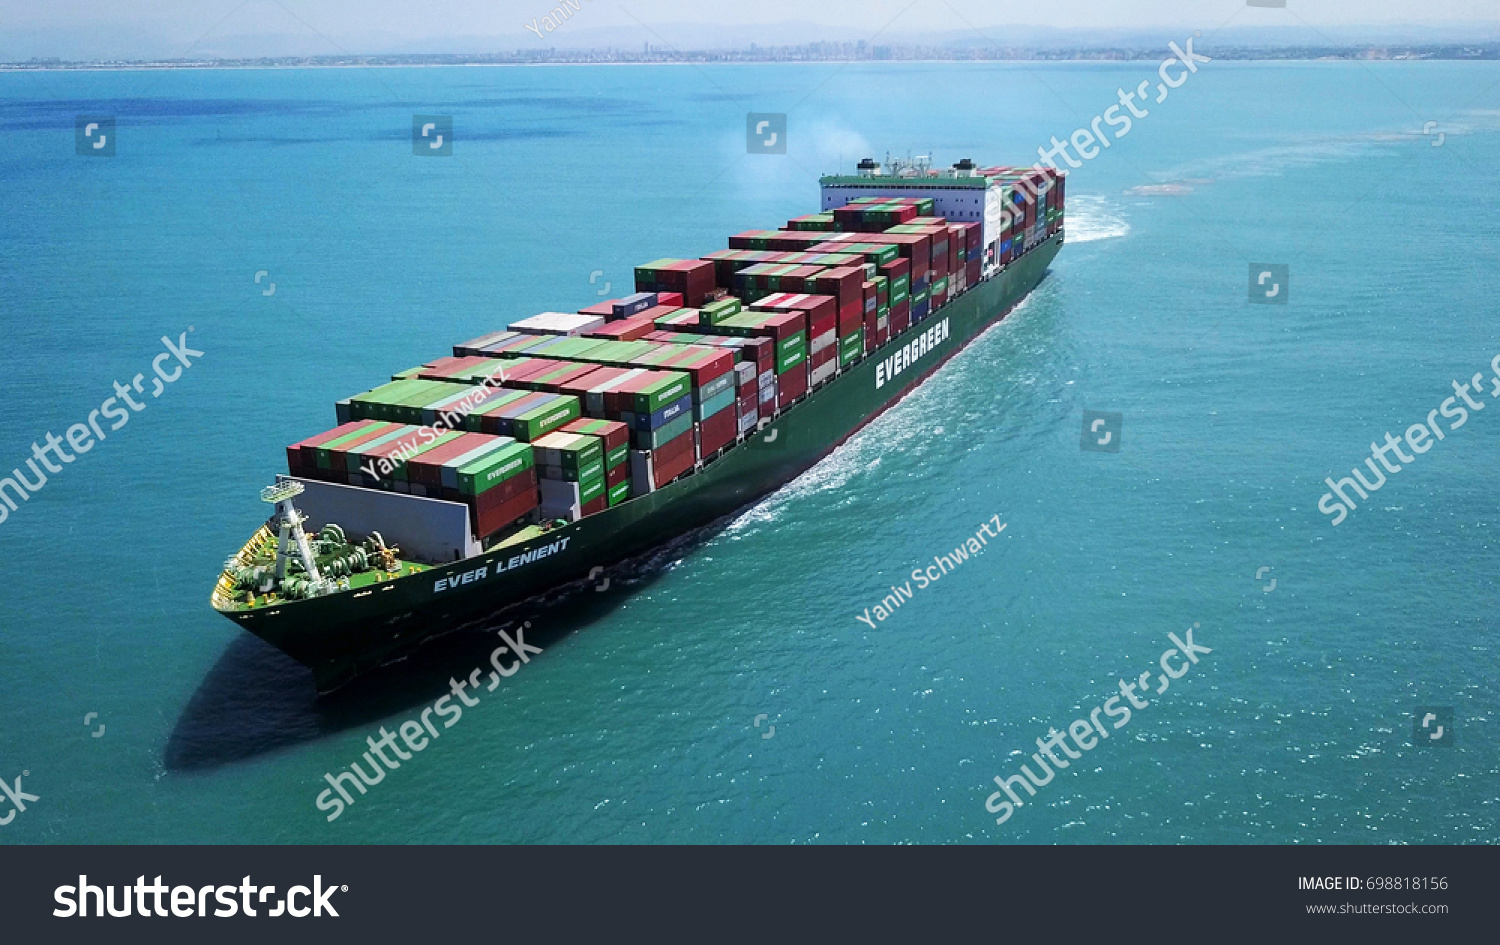 Haifa, Israel - 18 Aug, 2017: a huge big large container ship sails on open water fully loaded with containers and cargo - aerial  view #698818156